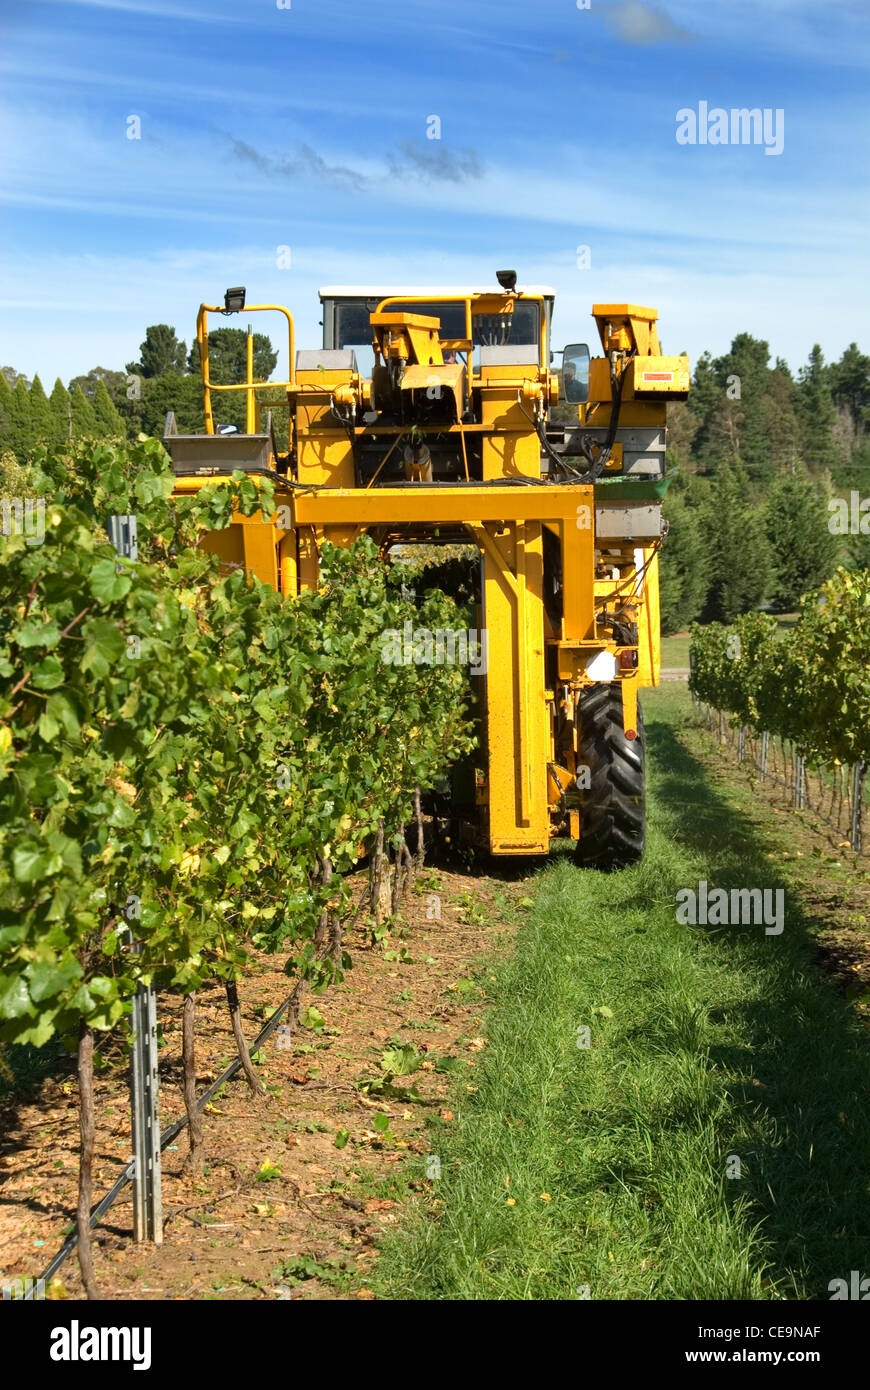 Harvesting Grapes in a vineyard near Sutton Forest, on the Southern Highlands of New South Wales, Australia Stock Photo